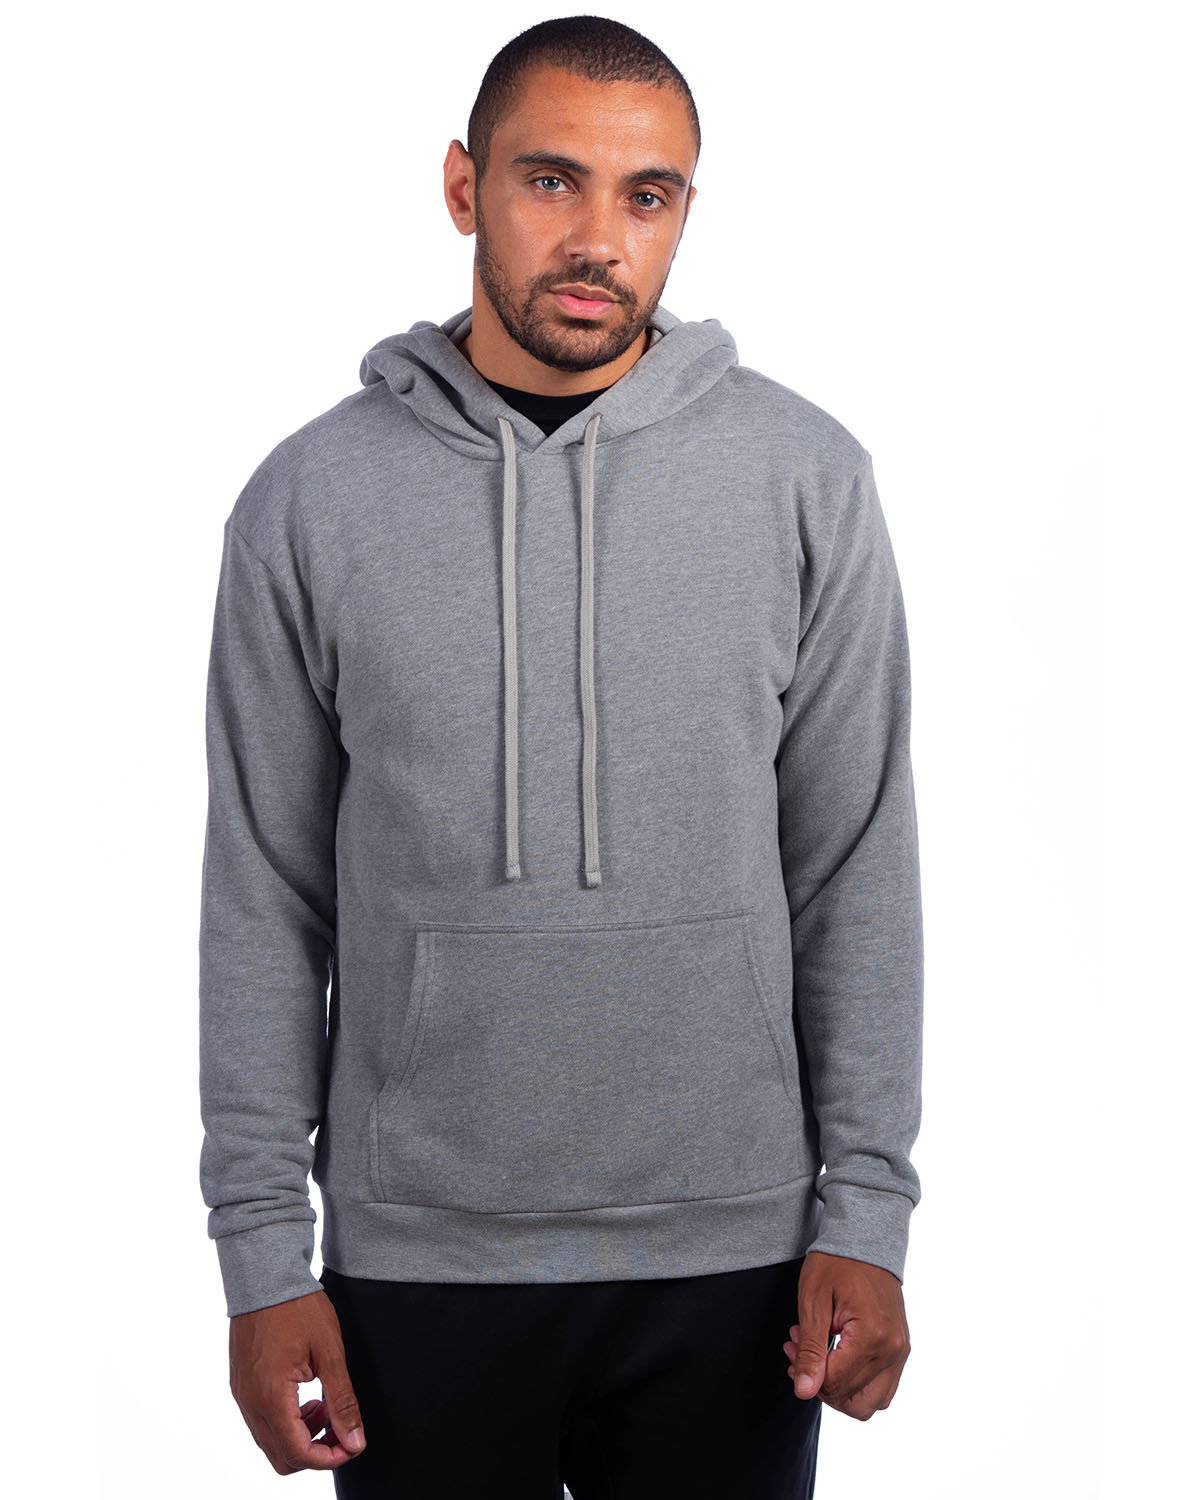 Next Level 9304 | Adult Sueded French Terry Pullover Sweatshirt ...